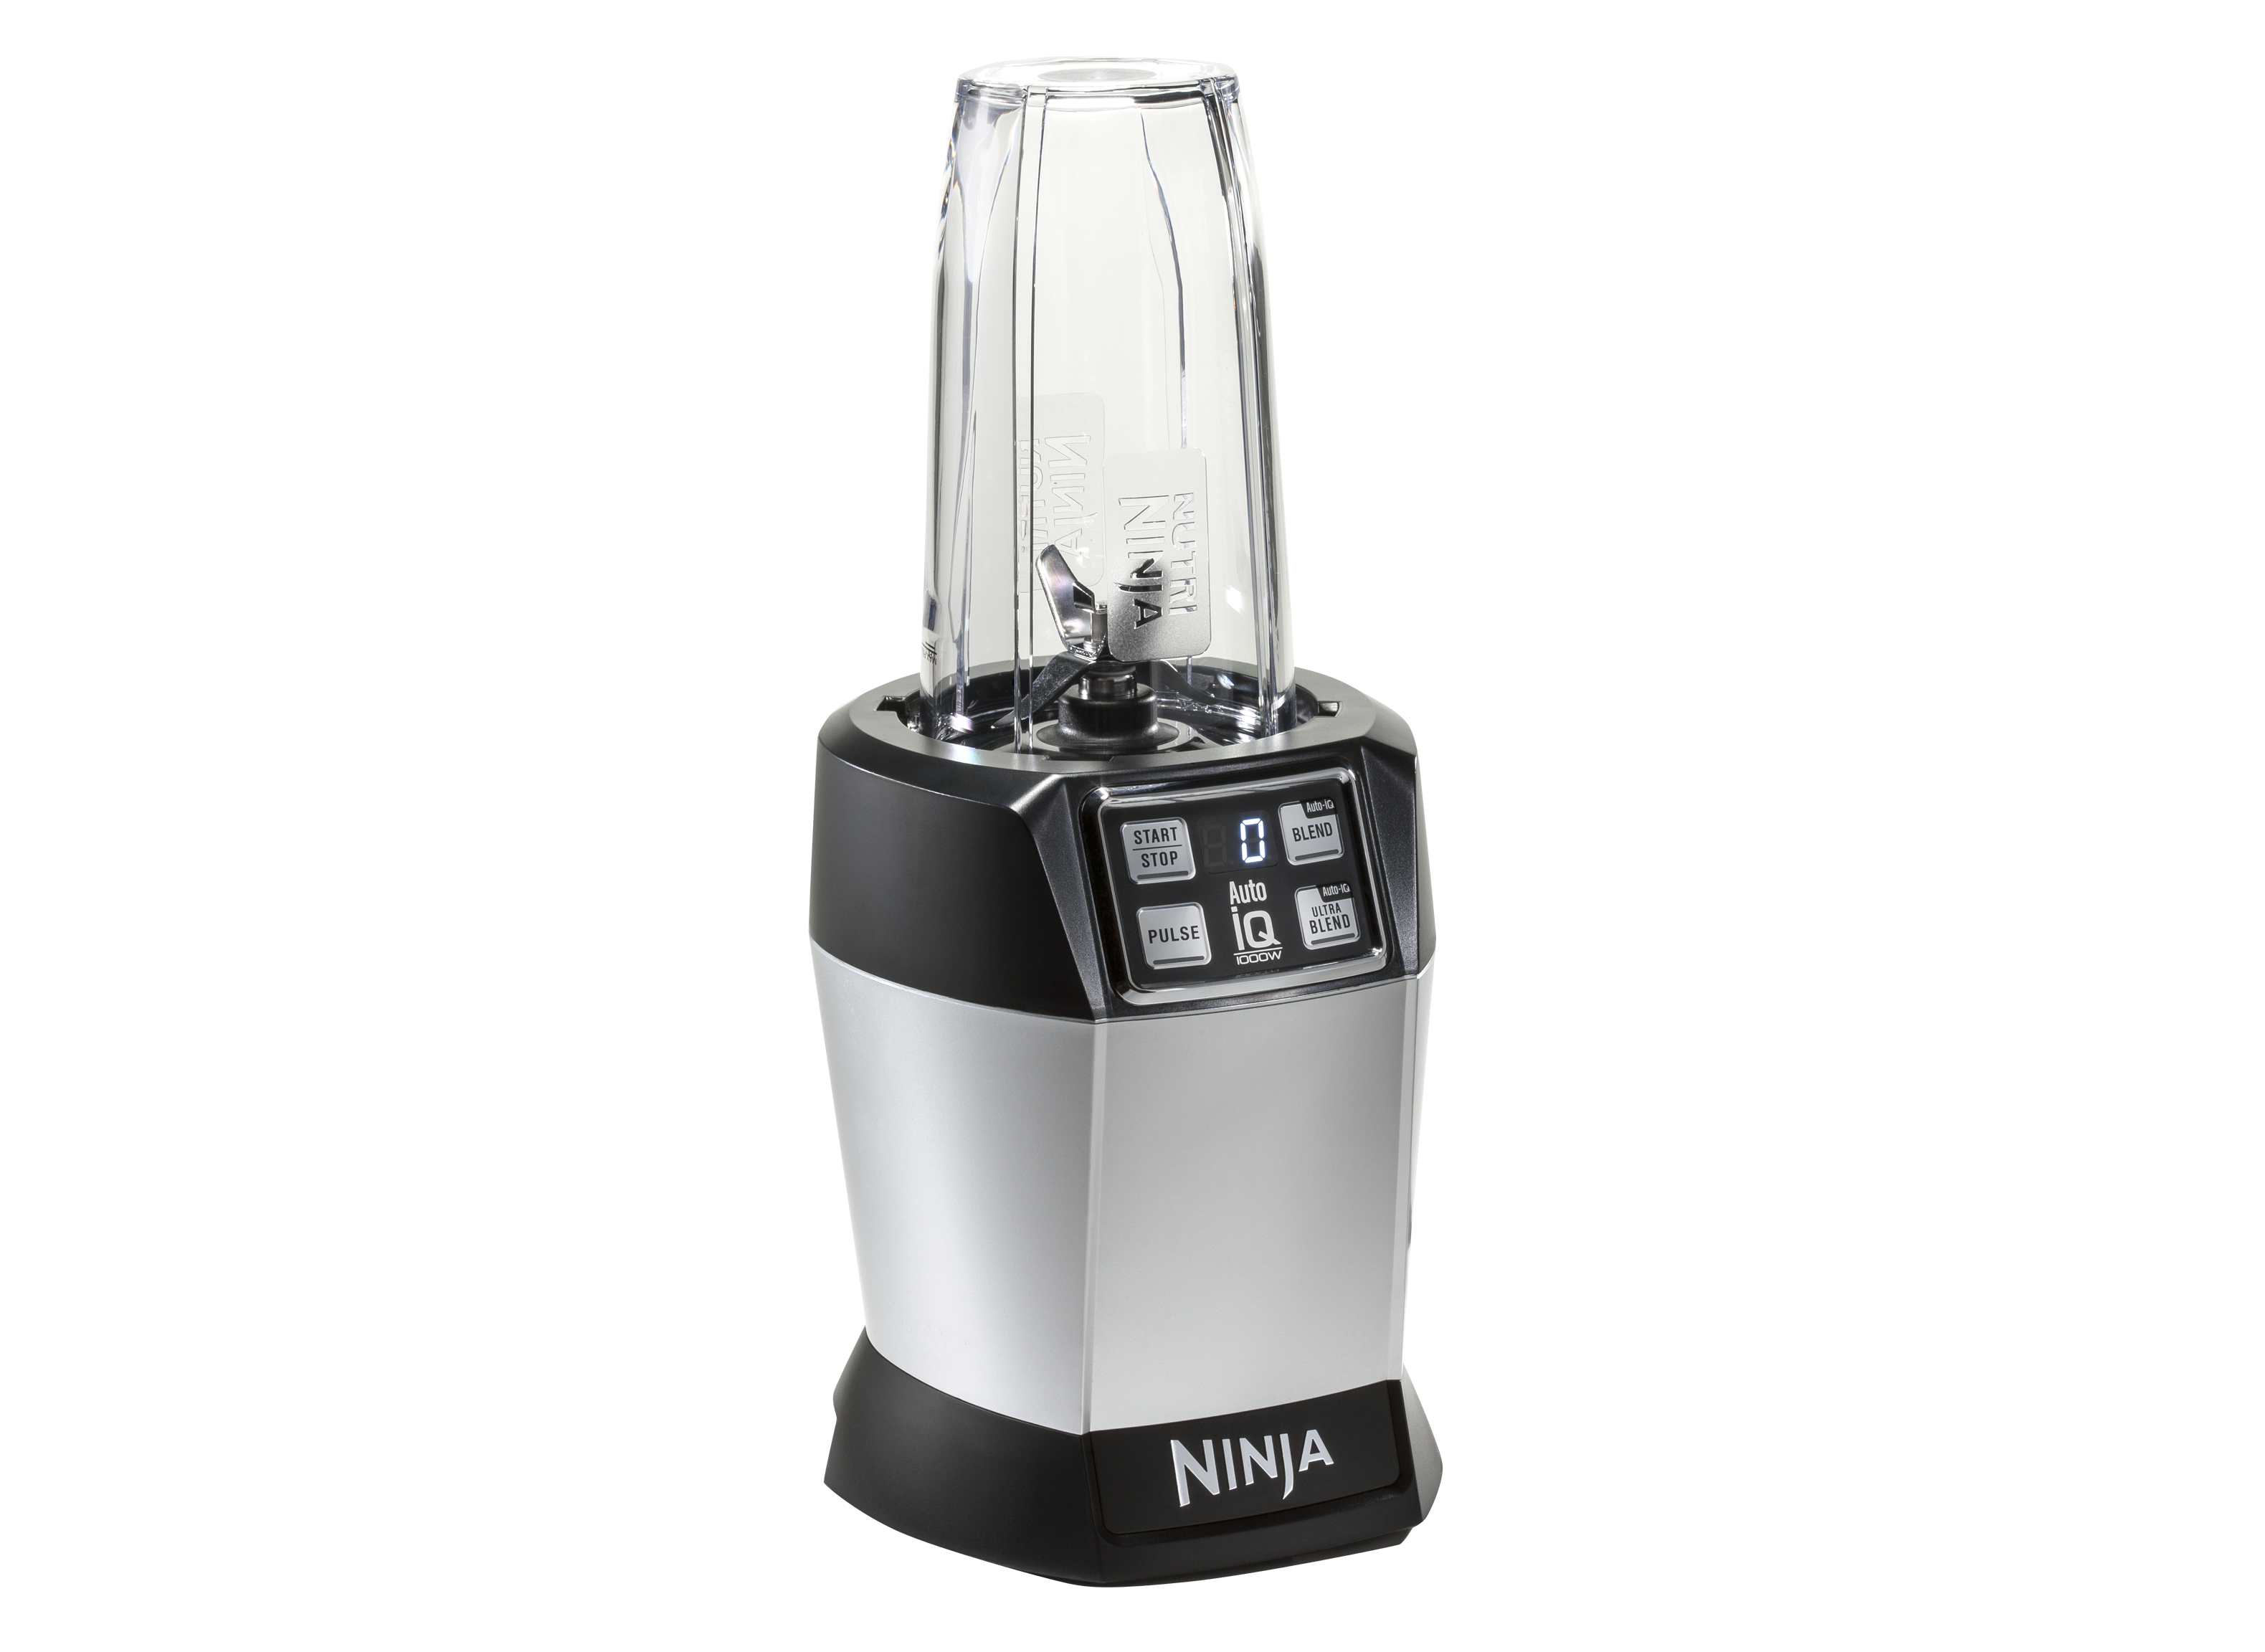 Erasure Hearing Word Ninja Personal Blender with Auto-iQ BL480 Blender Review - Consumer Reports